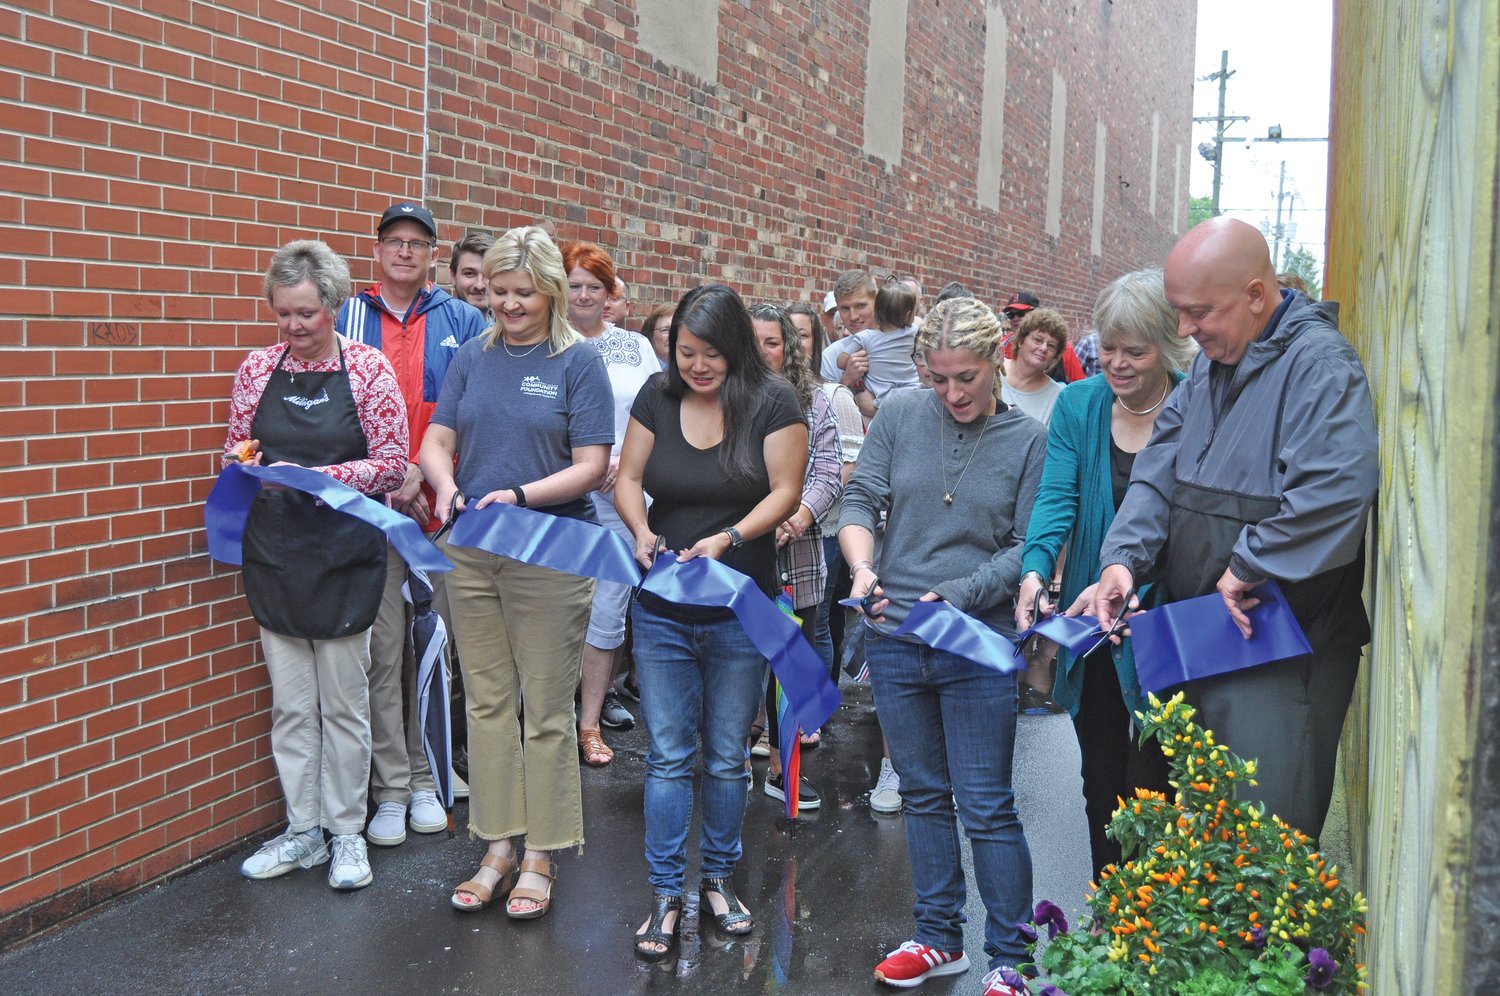 Dignitaries cut the ribbon for the new downtown Crawfordsville alley mural on Saturday.